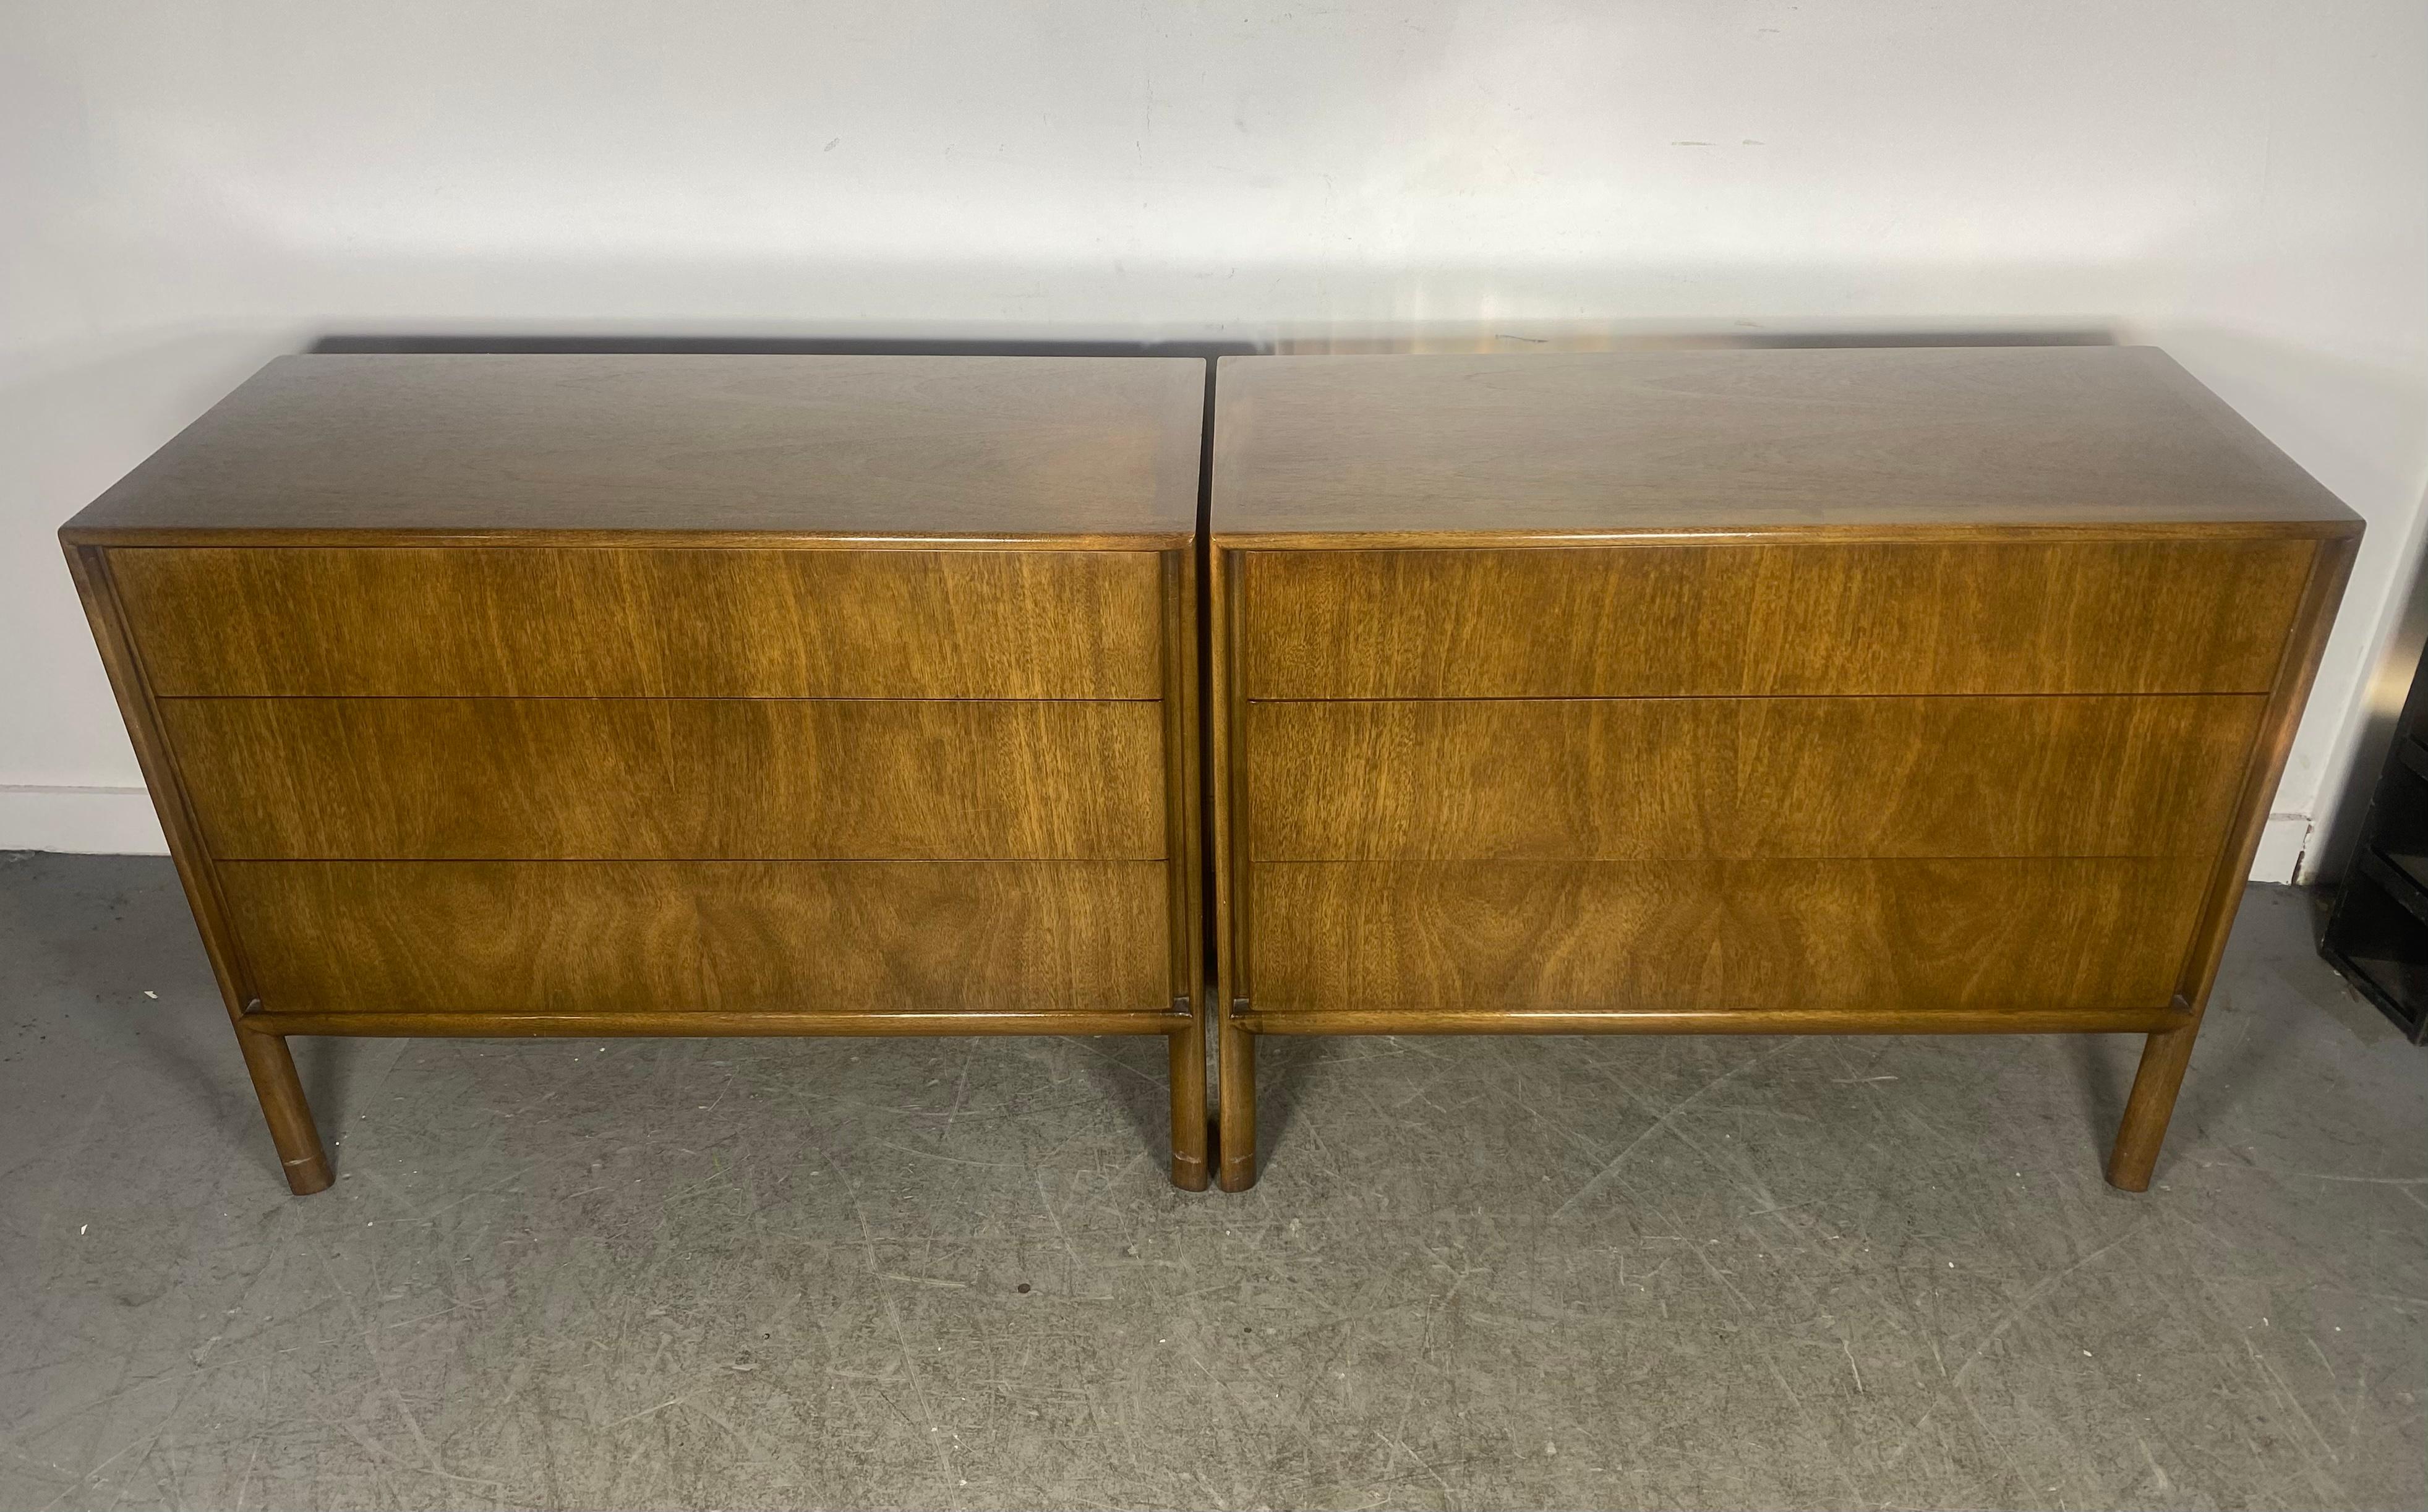 Classic Pair Modernist 3 Drawer Dressers / sTANDS, by mOUNT Airy furniture co. for James Stuart.. Amazing book-matched wood graining..Sleek , simple design.Superior quality and construction, Hand delivery avail to New York City or anywhere en route